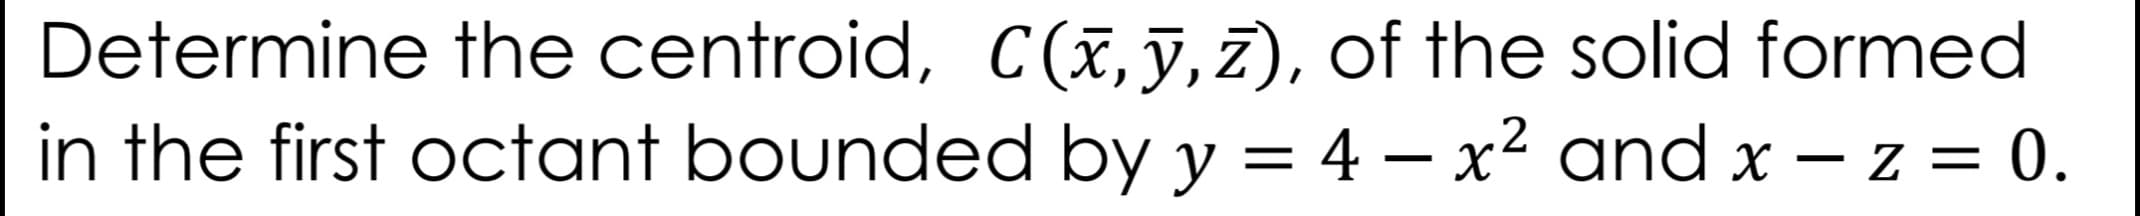 Determine the centroid, C(x, ỹ, 7), of the solid formed
in the first octant bounded by y = 4 – x² and x – z = 0.
-
